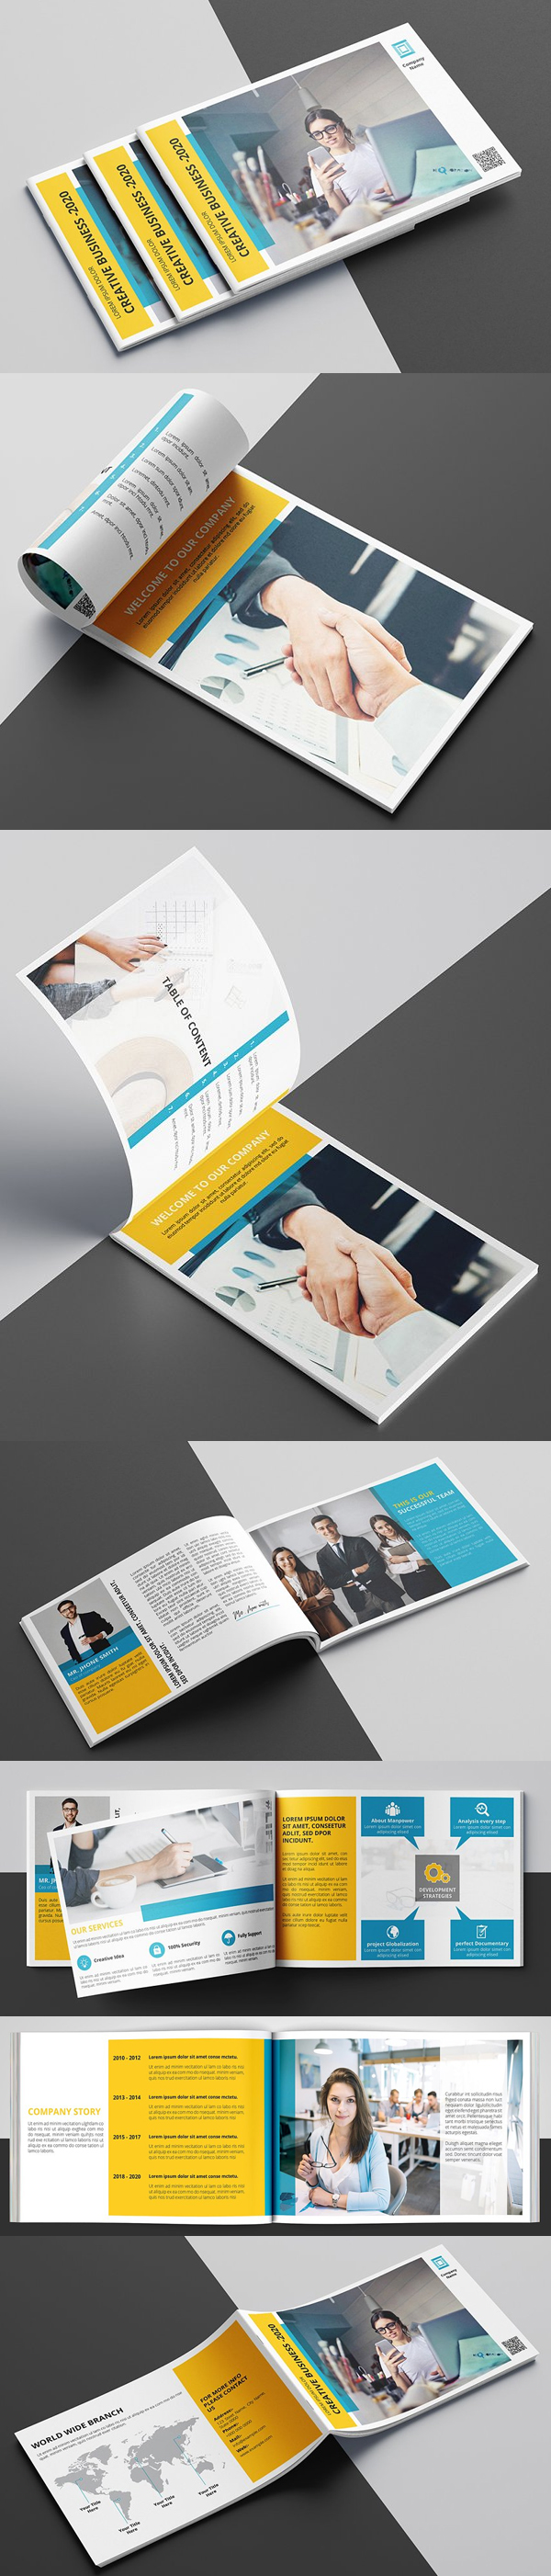 Perfect Business Brochure Template